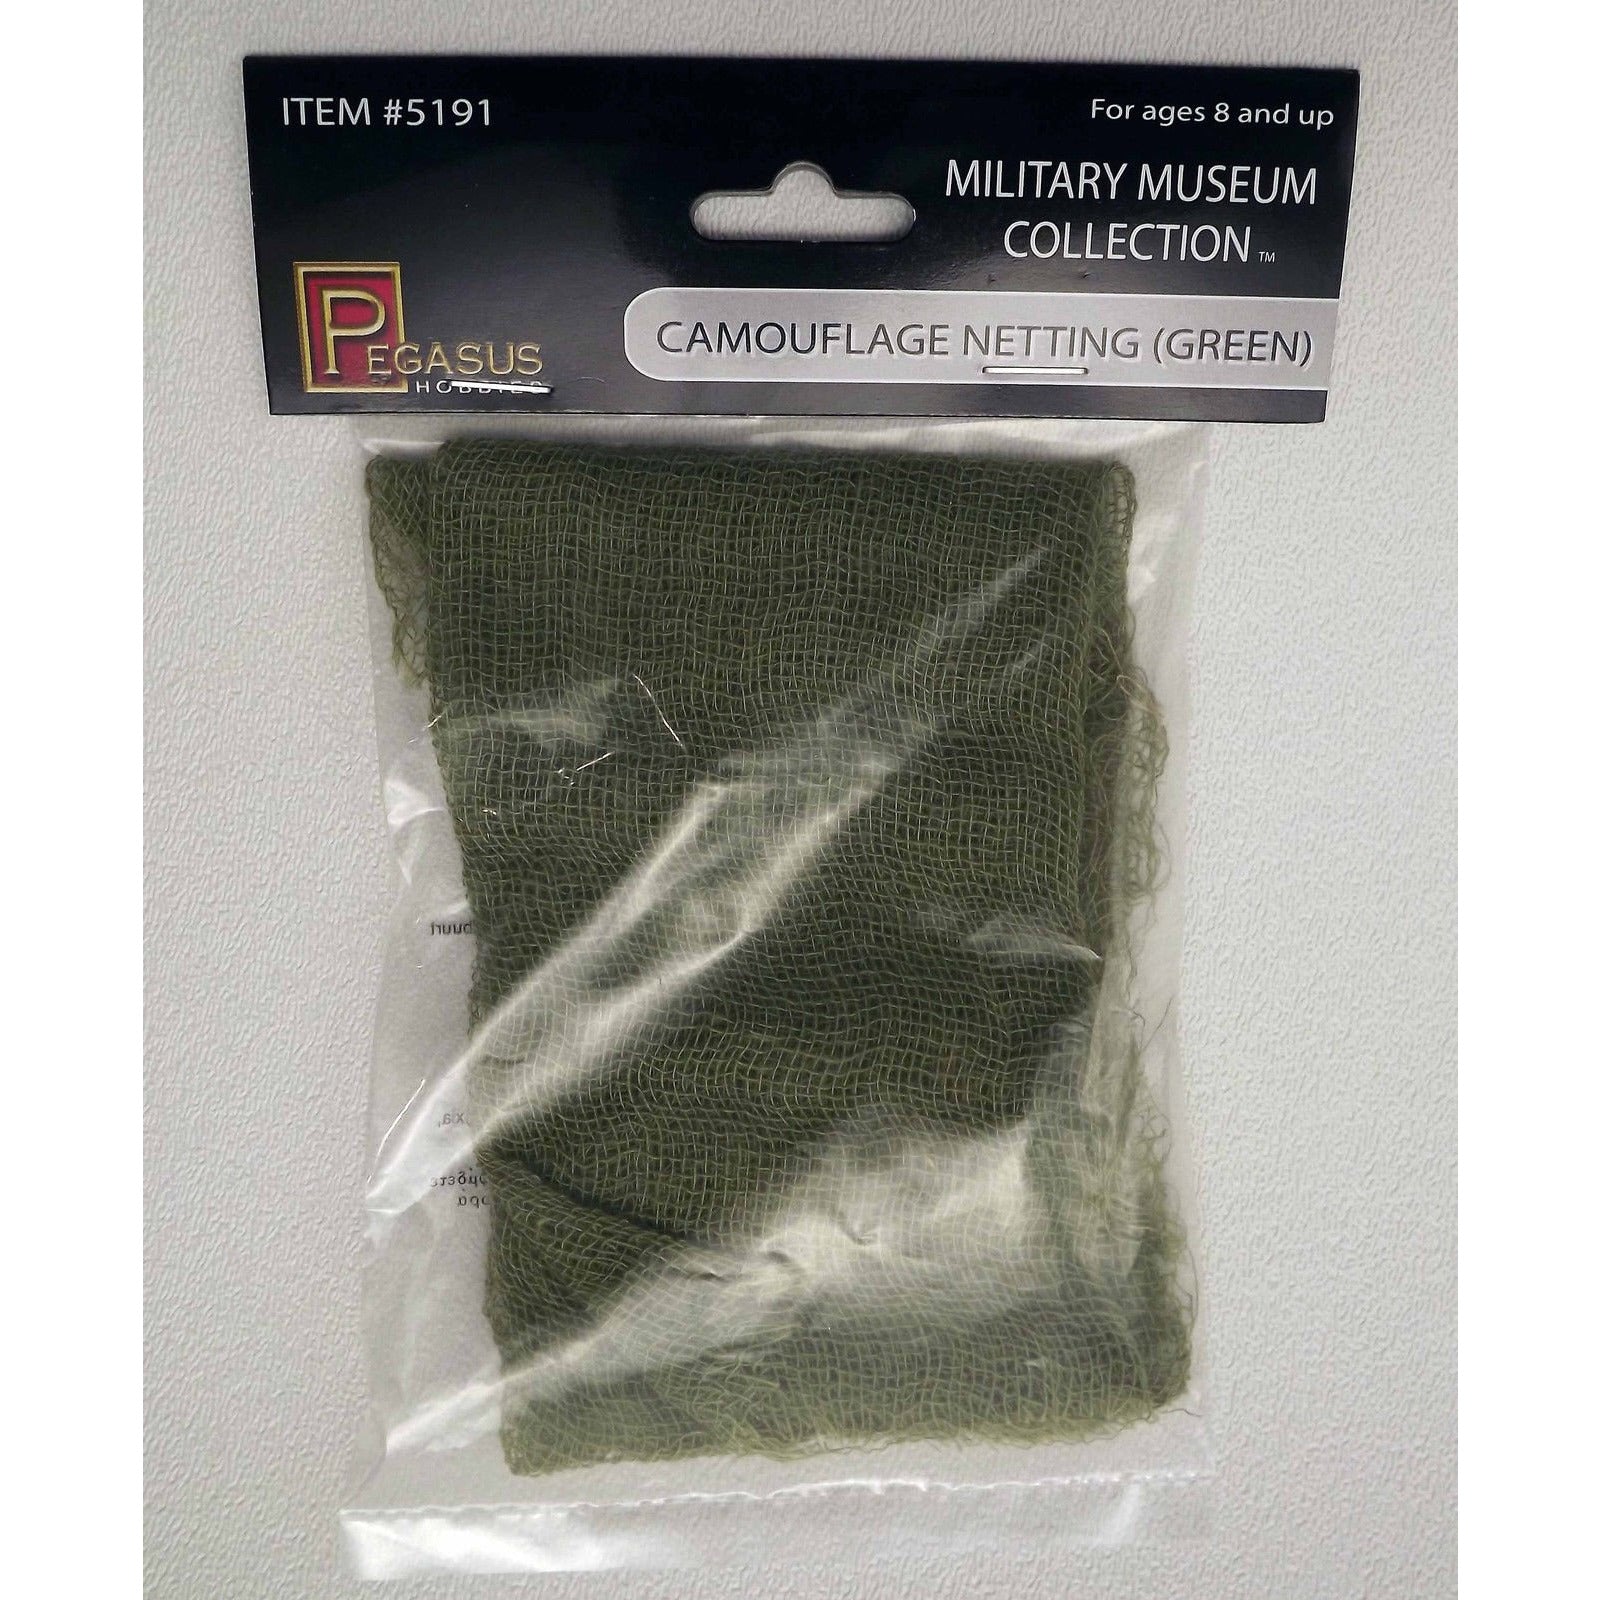 Camouflage Netting - Olive Drab (Cloth) #5191 by Pegasus Hobbies